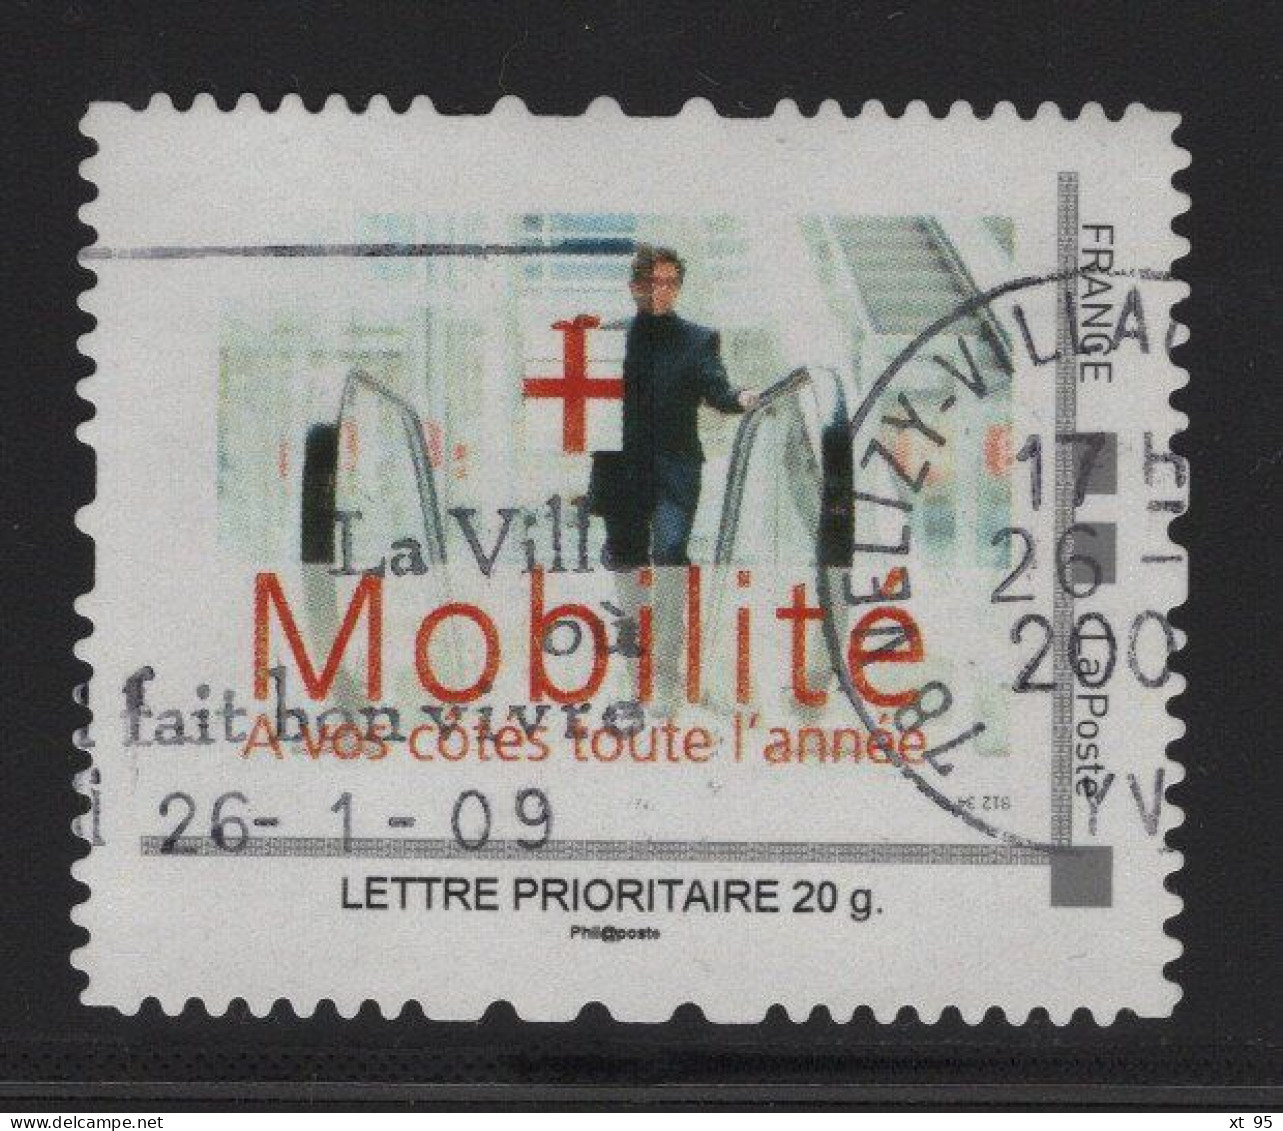 Timbre Personnalise Oblitere - Lettre Prioritaire 20g - Mobilite - Used Stamps